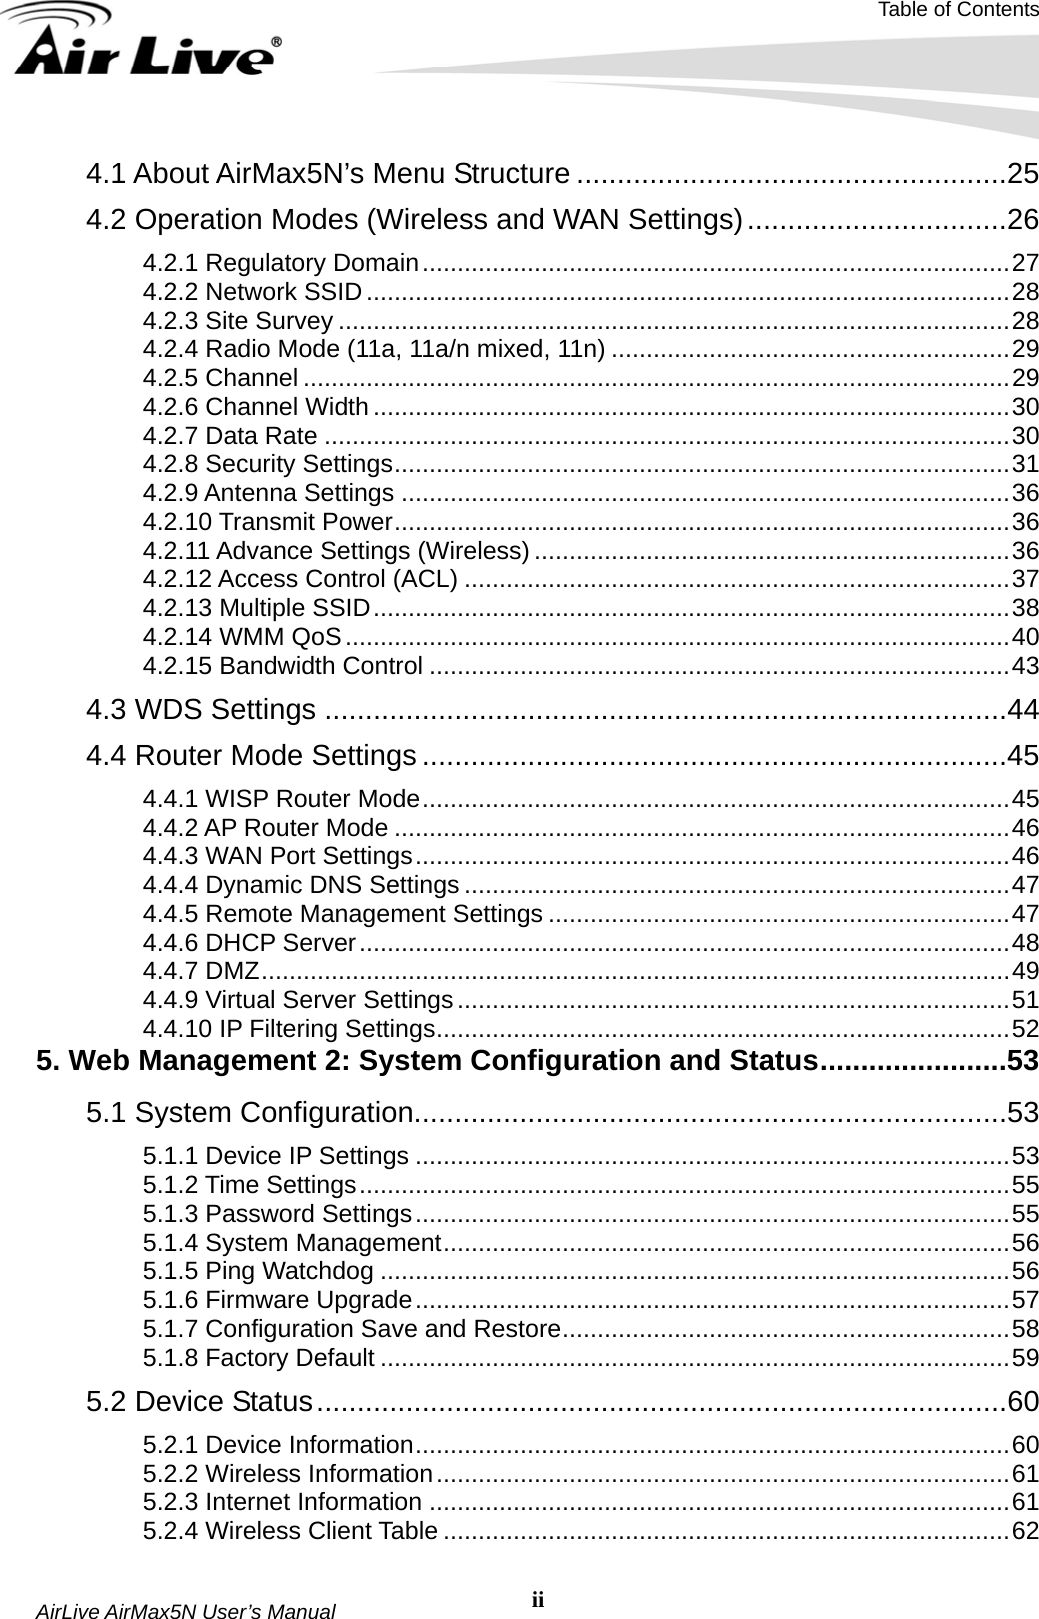 Table of Contents  AirLive AirMax5N User’s Manual  ii4.1 About AirMax5N’s Menu Structure .....................................................25 4.2 Operation Modes (Wireless and WAN Settings)................................26 4.2.1 Regulatory Domain....................................................................................27 4.2.2 Network SSID............................................................................................28 4.2.3 Site Survey ................................................................................................28 4.2.4 Radio Mode (11a, 11a/n mixed, 11n) .........................................................29 4.2.5 Channel .....................................................................................................29 4.2.6 Channel Width...........................................................................................30 4.2.7 Data Rate ..................................................................................................30 4.2.8 Security Settings........................................................................................31 4.2.9 Antenna Settings .......................................................................................36 4.2.10 Transmit Power........................................................................................36 4.2.11 Advance Settings (Wireless) ....................................................................36 4.2.12 Access Control (ACL) ..............................................................................37 4.2.13 Multiple SSID...........................................................................................38 4.2.14 WMM QoS...............................................................................................40 4.2.15 Bandwidth Control ...................................................................................43 4.3 WDS Settings ....................................................................................44 4.4 Router Mode Settings ........................................................................45 4.4.1 WISP Router Mode....................................................................................45 4.4.2 AP Router Mode ........................................................................................46 4.4.3 WAN Port Settings.....................................................................................46 4.4.4 Dynamic DNS Settings ..............................................................................47 4.4.5 Remote Management Settings ..................................................................47 4.4.6 DHCP Server.............................................................................................48 4.4.7 DMZ...........................................................................................................49 4.4.9 Virtual Server Settings...............................................................................51 4.4.10 IP Filtering Settings..................................................................................52 5. Web Management 2: System Configuration and Status.......................53 5.1 System Configuration.........................................................................53 5.1.1 Device IP Settings .....................................................................................53 5.1.2 Time Settings.............................................................................................55 5.1.3 Password Settings.....................................................................................55 5.1.4 System Management.................................................................................56 5.1.5 Ping Watchdog ..........................................................................................56 5.1.6 Firmware Upgrade.....................................................................................57 5.1.7 Configuration Save and Restore................................................................58 5.1.8 Factory Default ..........................................................................................59 5.2 Device Status.....................................................................................60 5.2.1 Device Information.....................................................................................60 5.2.2 Wireless Information..................................................................................61 5.2.3 Internet Information ...................................................................................61 5.2.4 Wireless Client Table .................................................................................62 